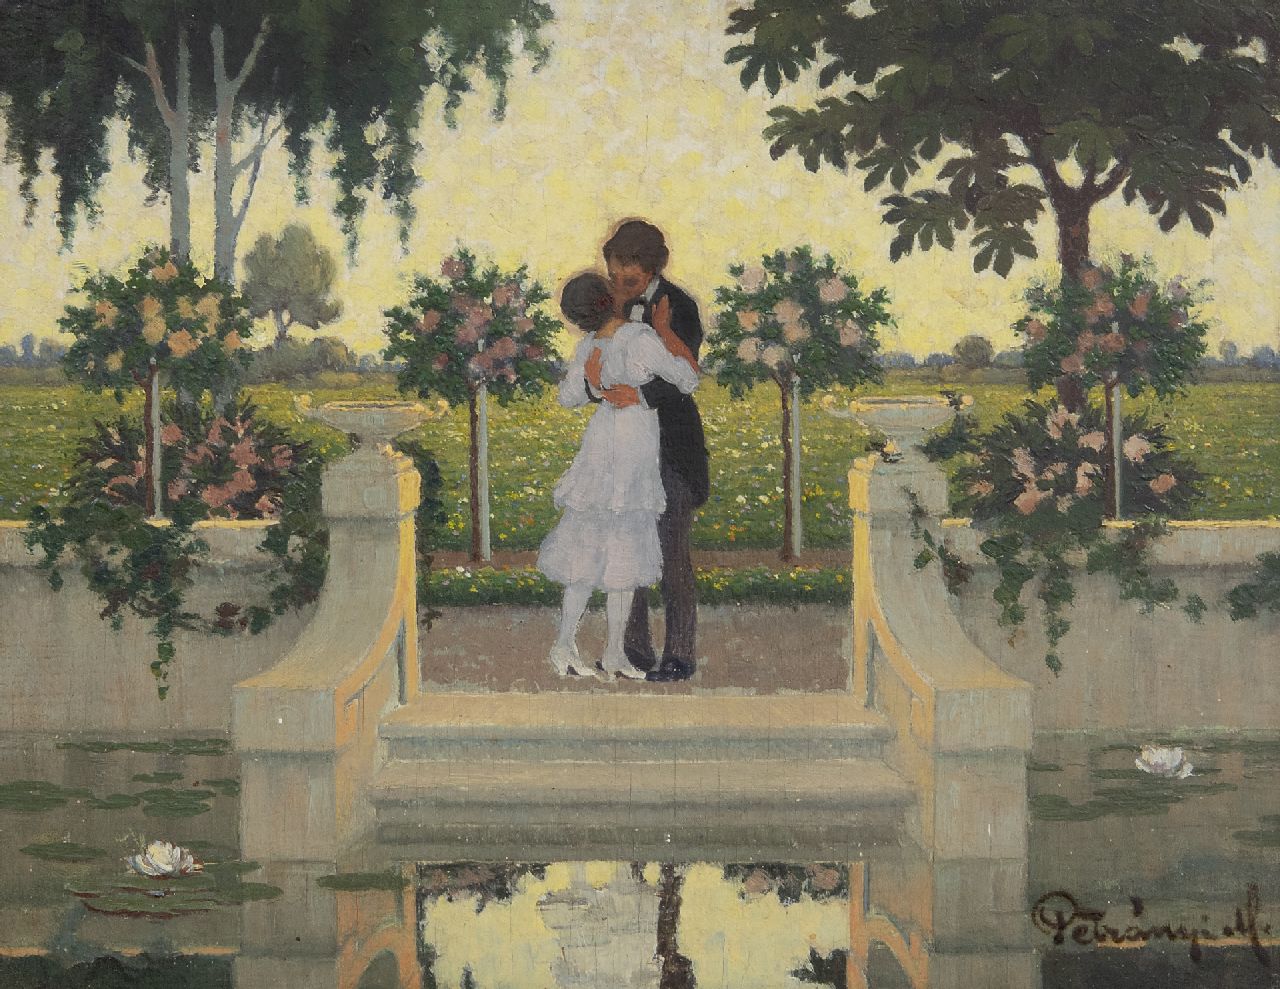 Nikolaus Petranyi | The French kiss, oil on panel, 18.0 x 23.0 cm, signed l.r. and dated 1917